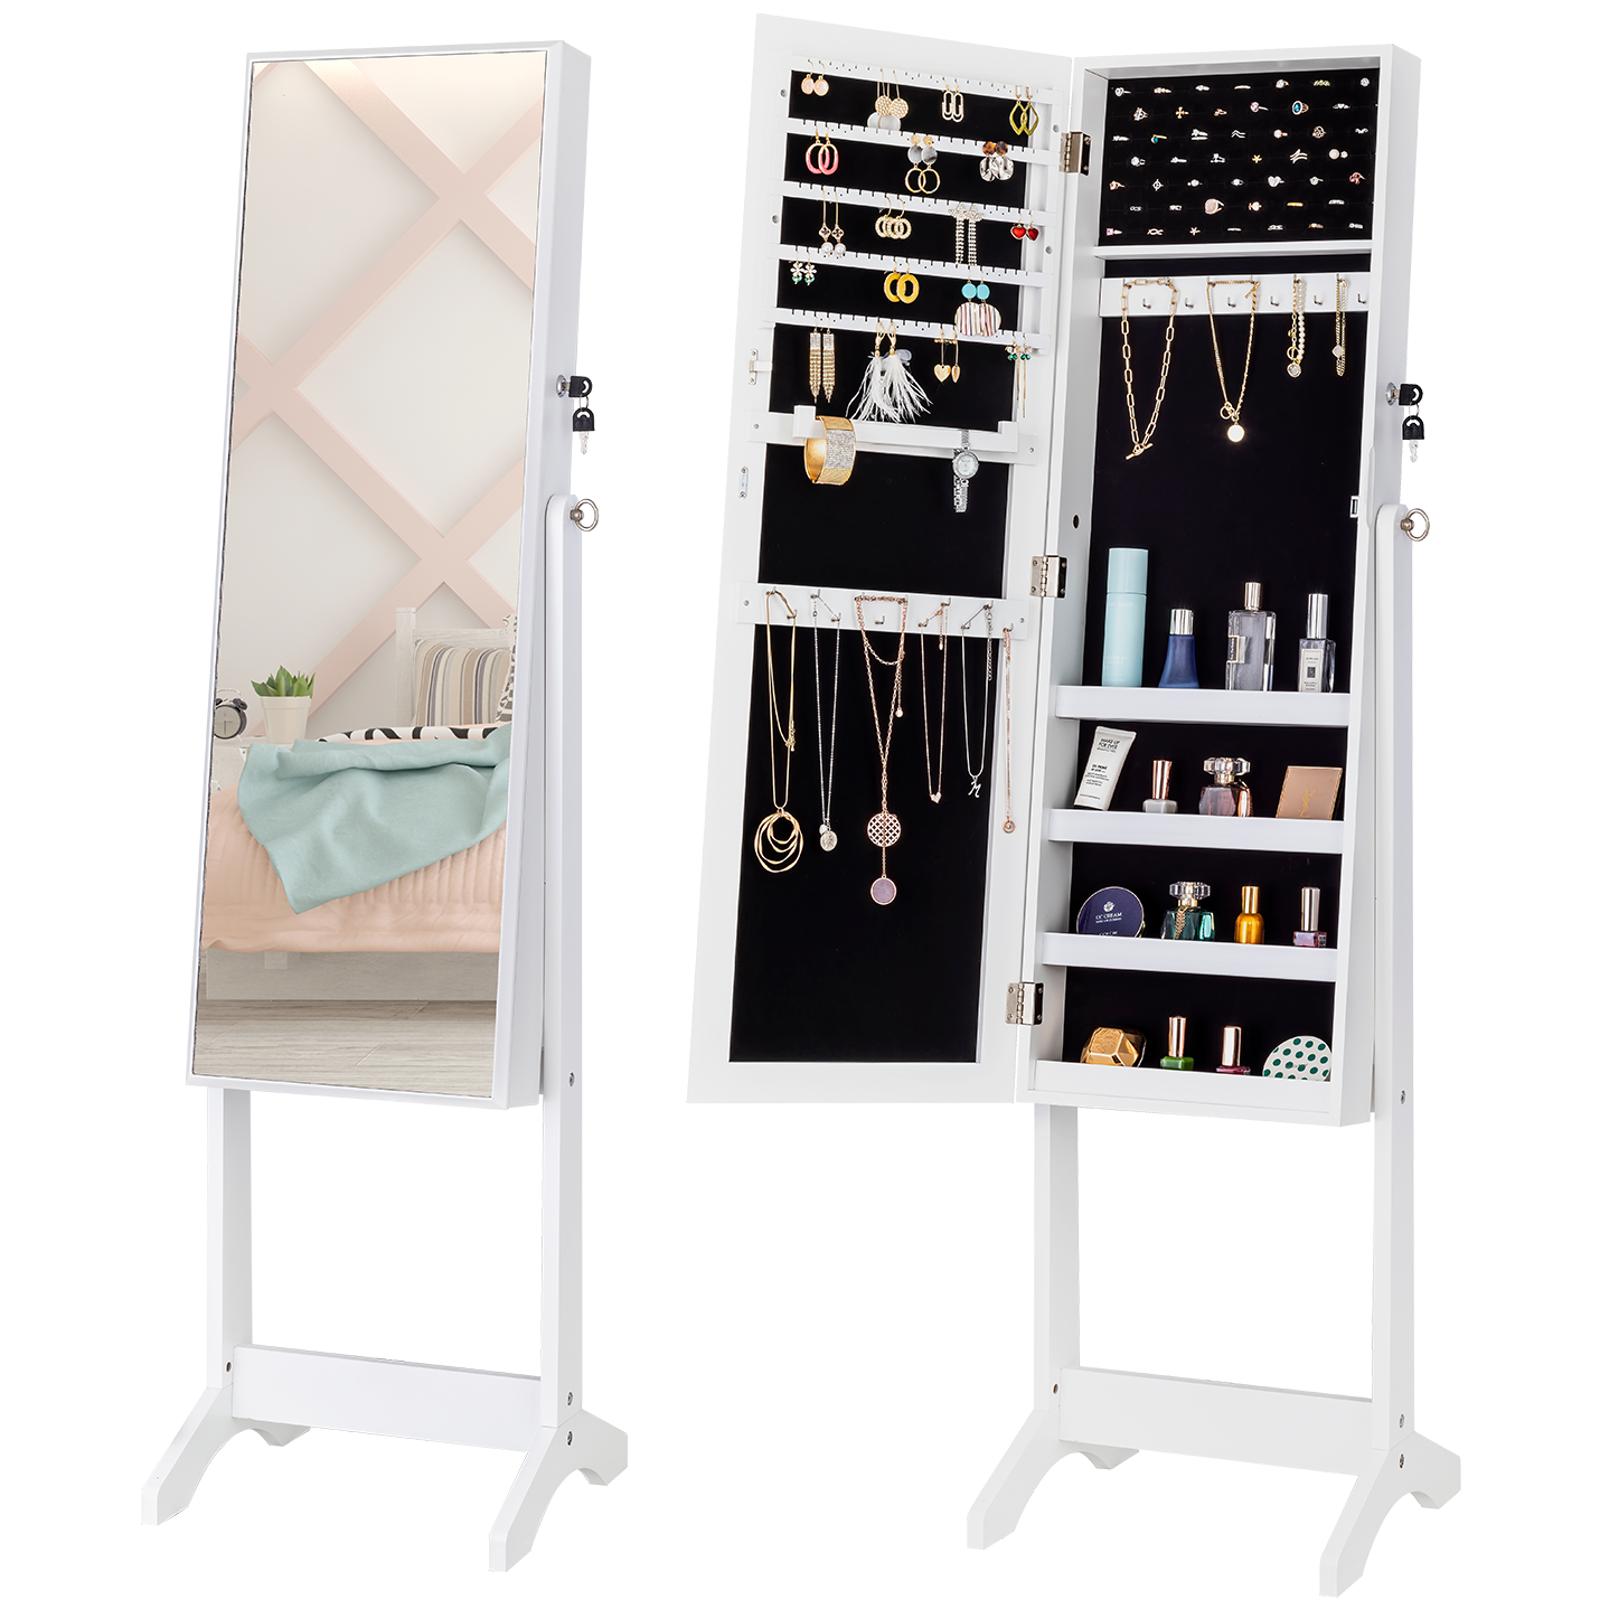 ViscoLogic Evie Jewelry Armoire Makeup Mirrored Storage Cabinet for Cosmetics, Jewelry, Lockable Cabinet, and Organizer With Dressing Mirror (White)